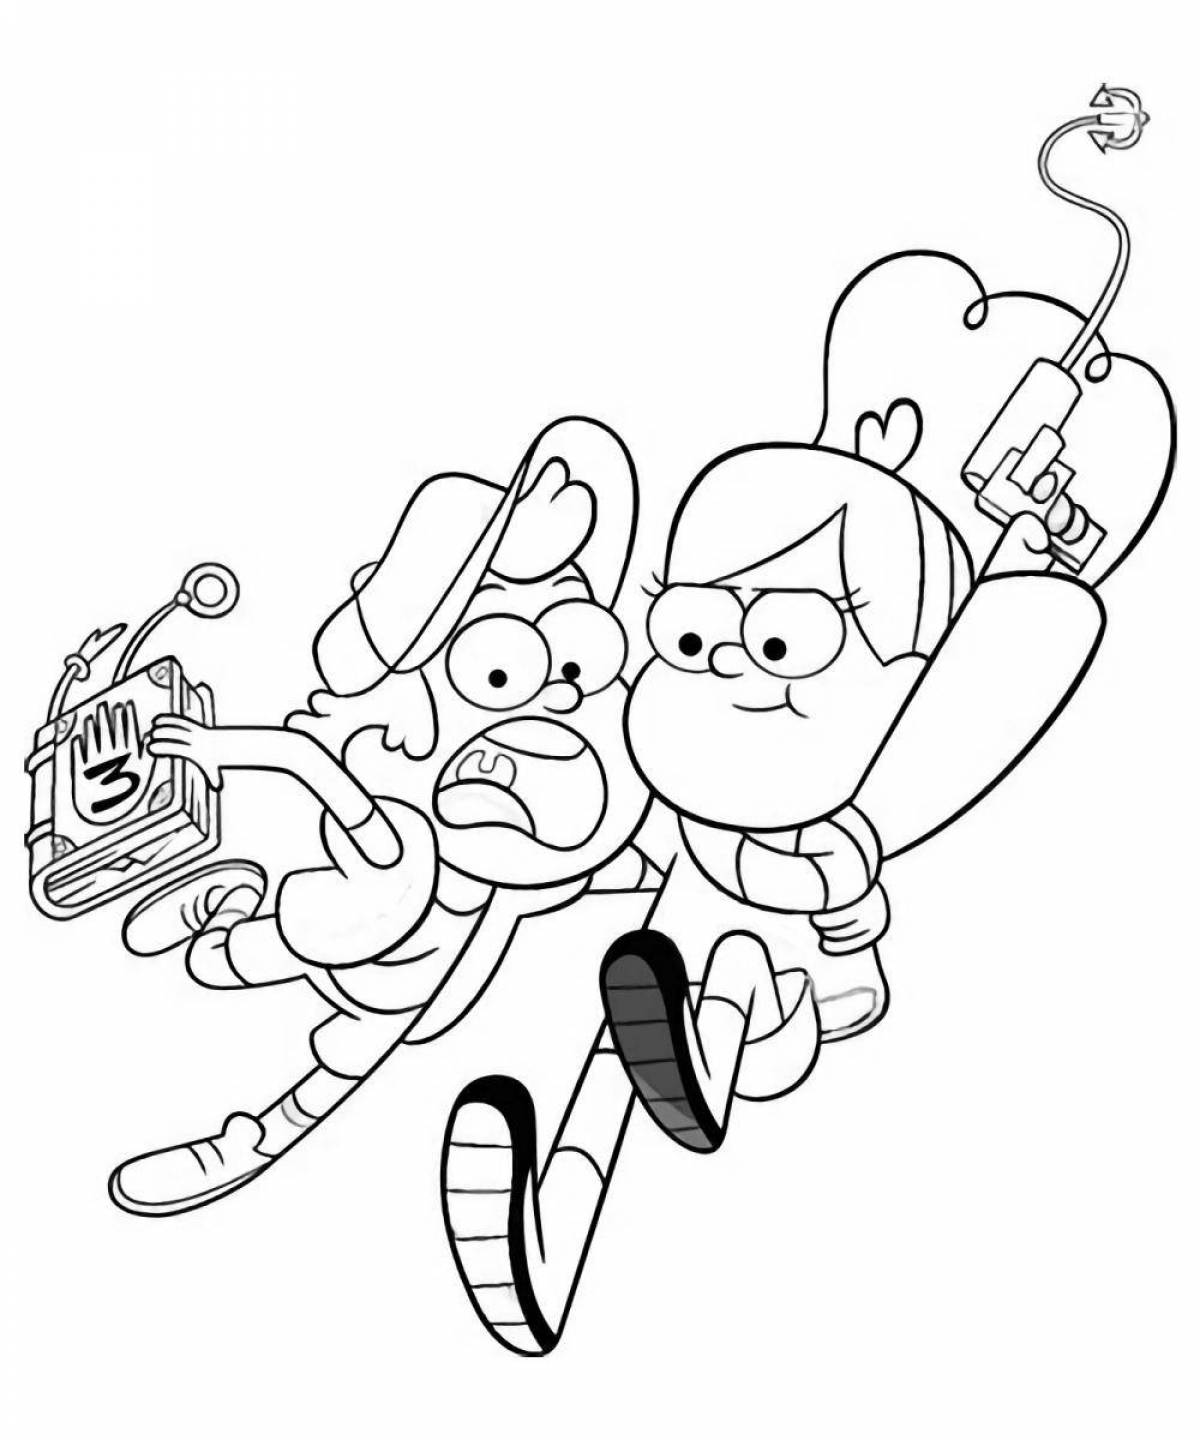 Funny mabel from gravity falls